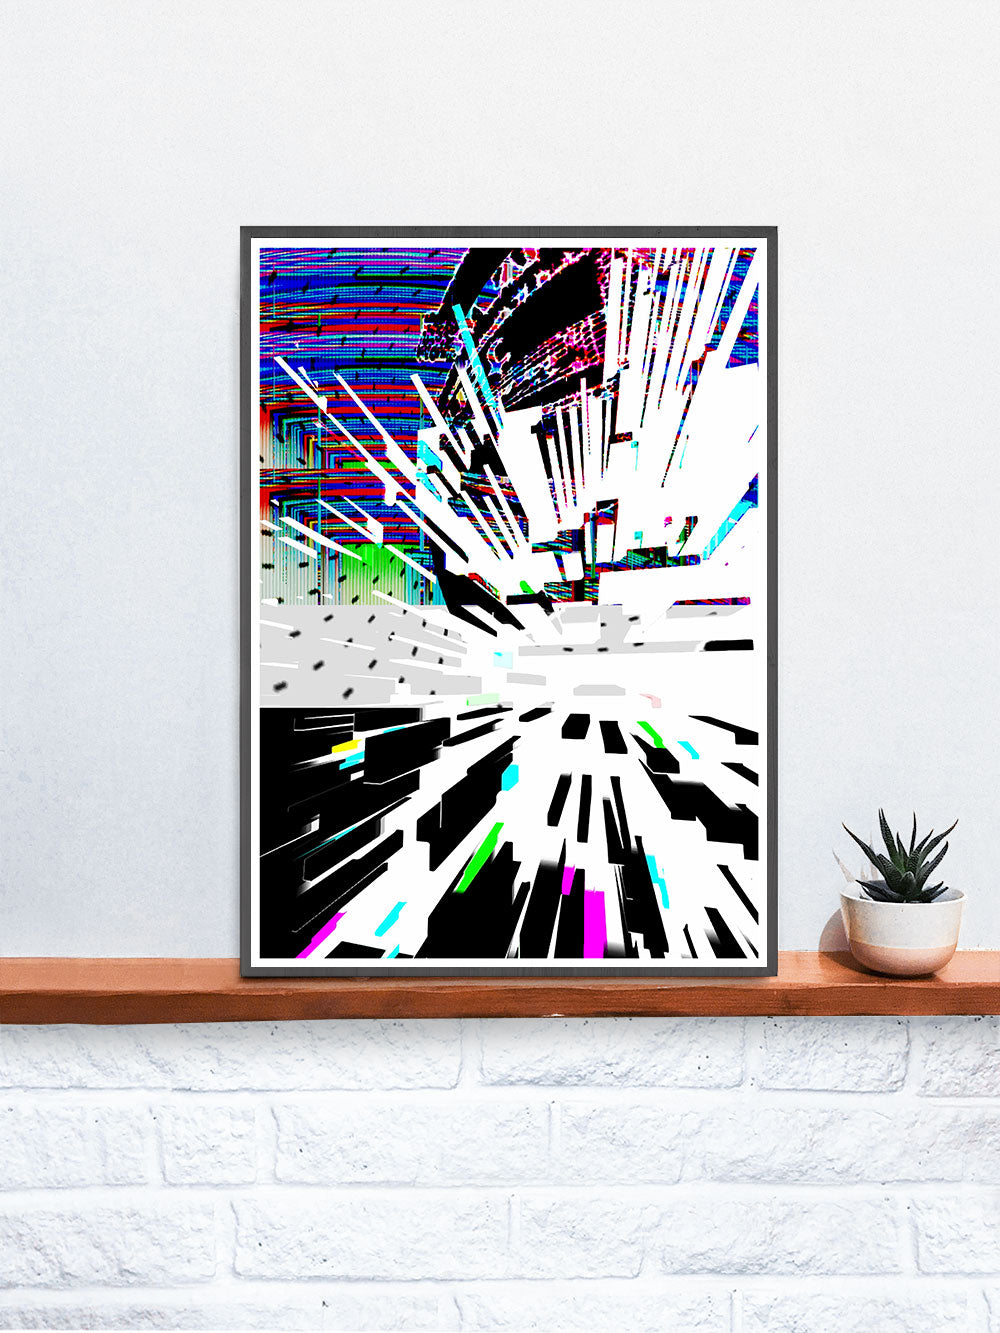 Watch Tower Glitch Poster Print in a frame on a shelf